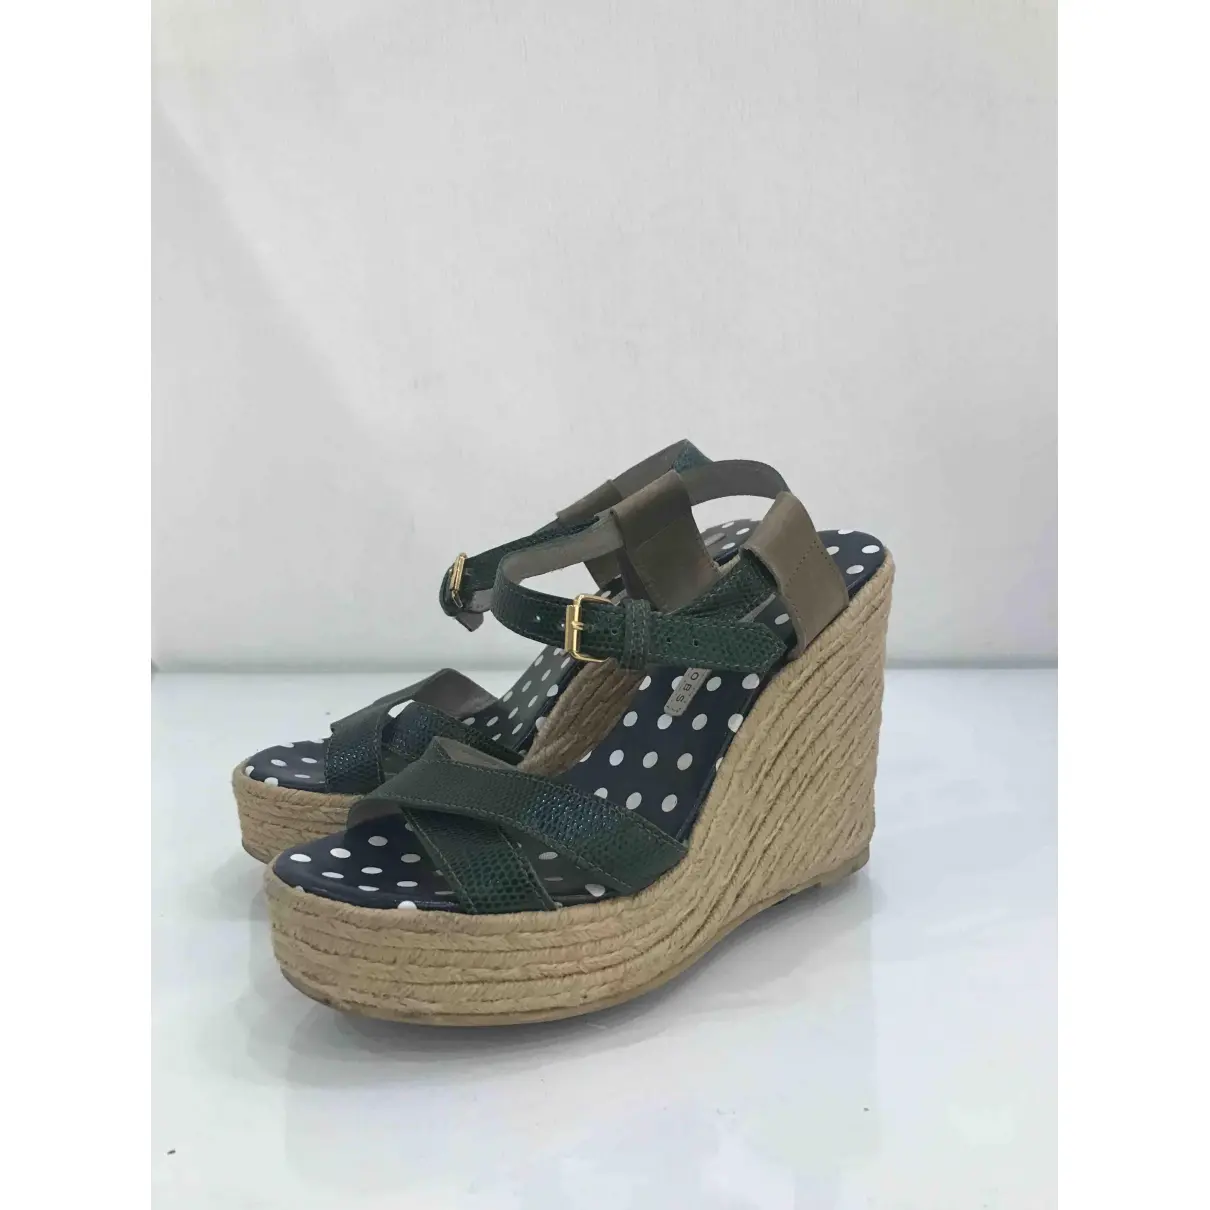 Marc by Marc Jacobs Leather espadrilles for sale